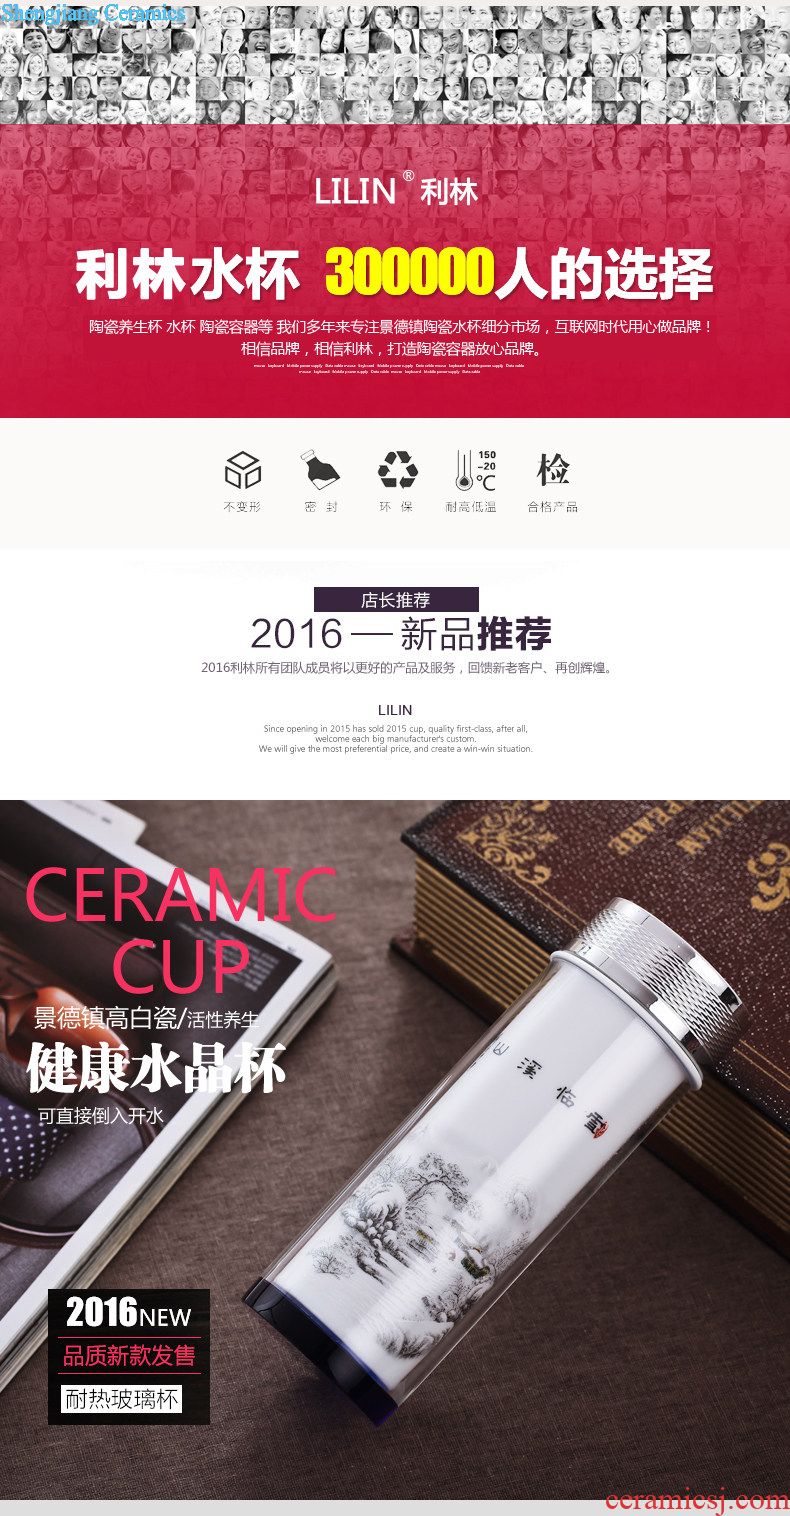 Ceramic cups with cover filter tea cup big boss cup office cup with personal jingdezhen tea set